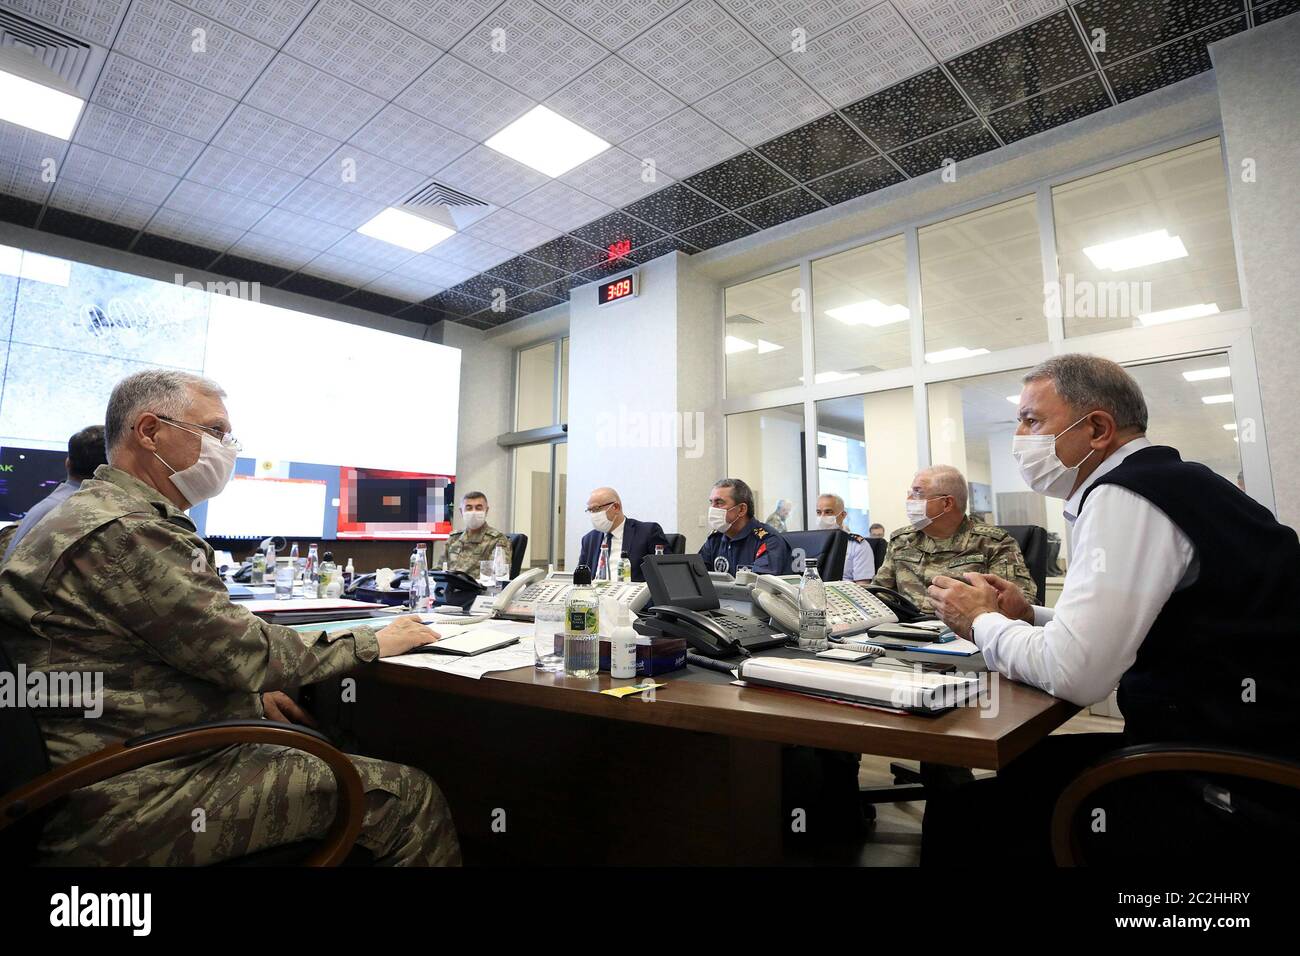 Ankara. 17th June, 2020. Turkish Defense Minister Hulusi Akar (1st R) attends a meeting with other commanders at the Army Command Control Center in Ankara, Turkey, on June 17, 2020. Turkey has launched Operation Claw-Tiger in northern Iraq with its commando forces supported by air elements, Turkish Defense Ministry announced on Wednesday. Credit: Xinhua/Alamy Live News Stock Photo